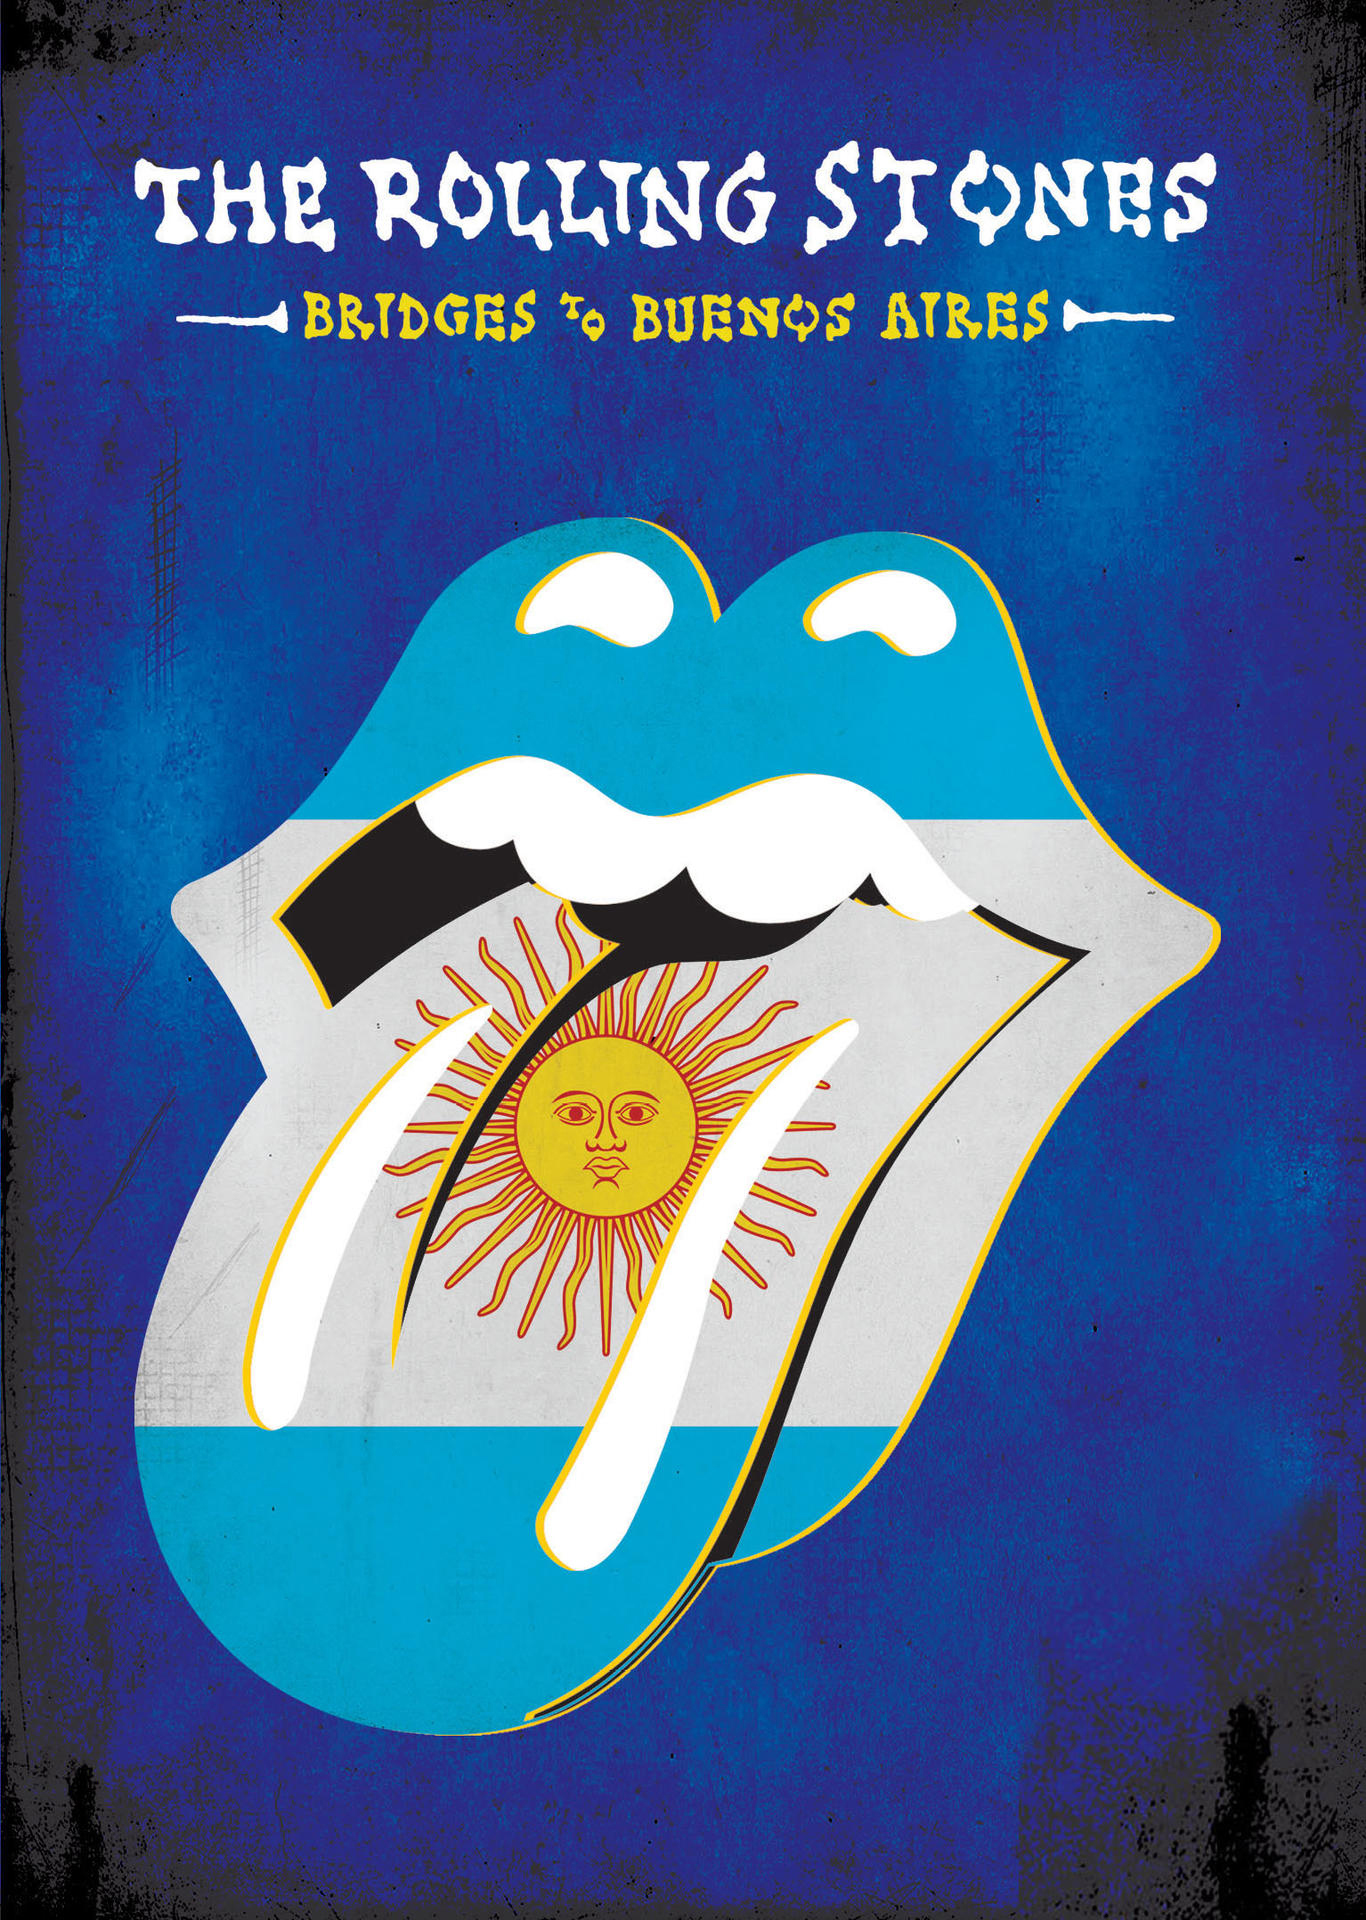 Buenos To Bridges - The Aires - (DVD) Rolling Stones